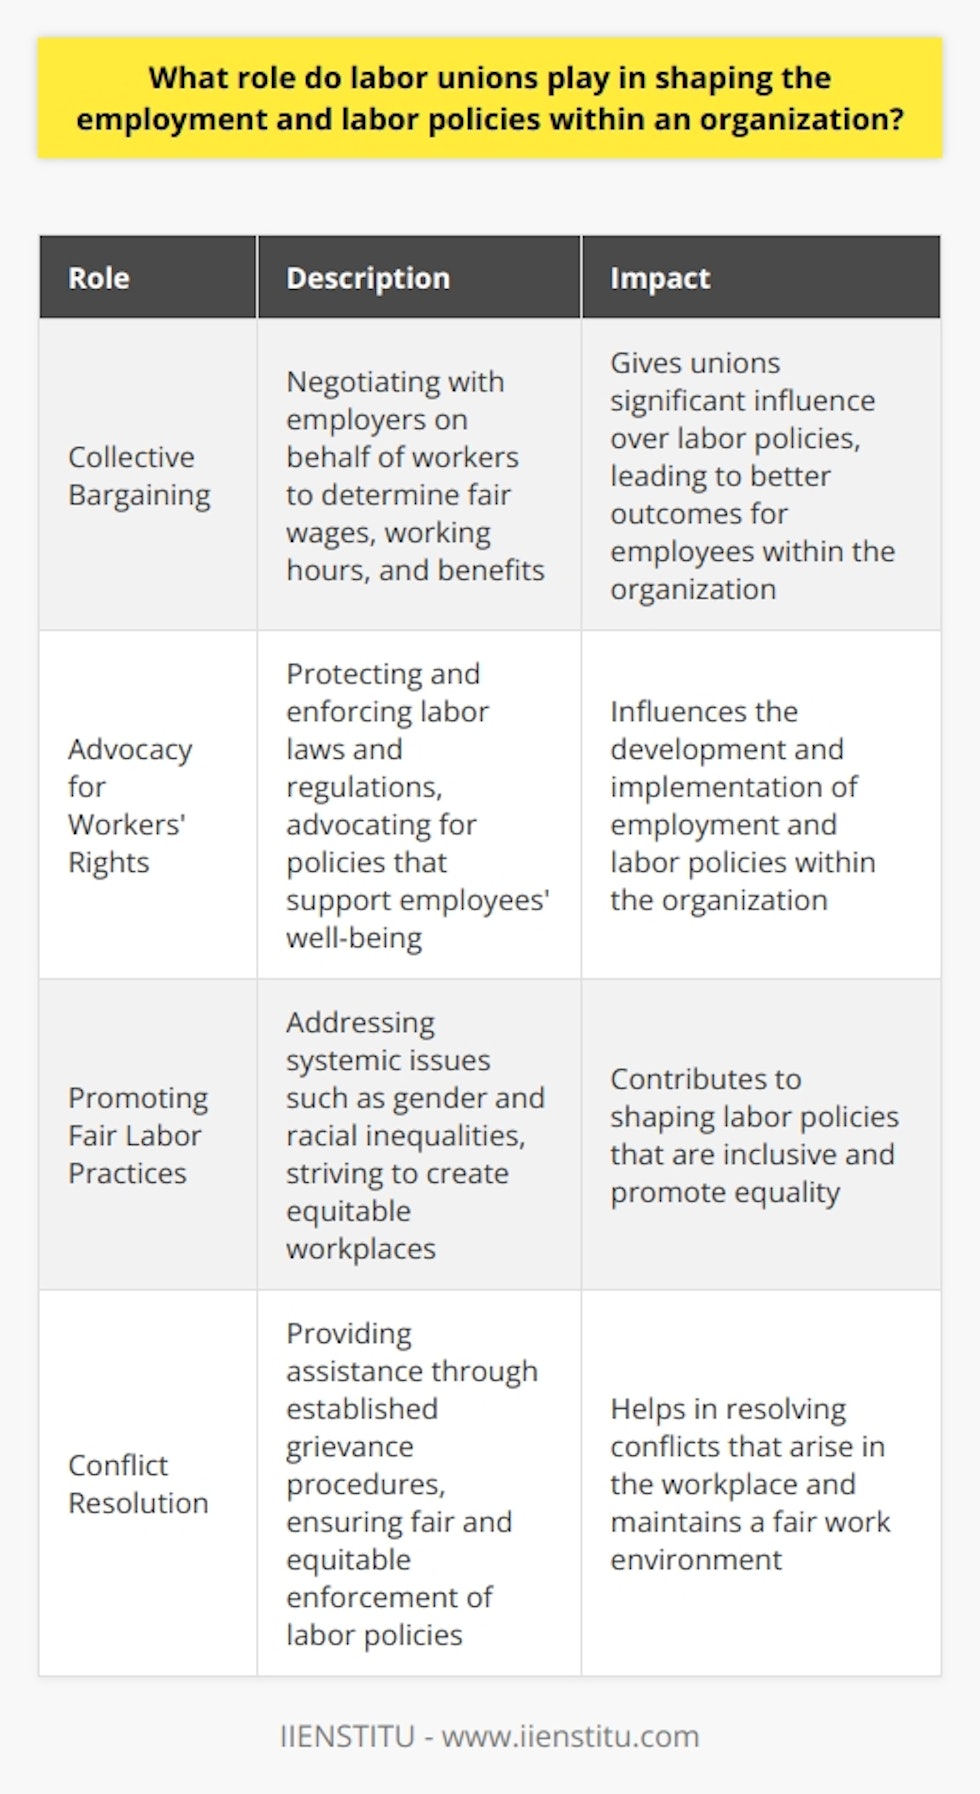 Labor unions have a significant impact on the development and implementation of employment and labor policies within organizations. They do so through the process of collective bargaining, advocating for workers' rights, promoting fair labor practices, and assisting in conflict resolution.Collective bargaining is a fundamental function of labor unions. Through collective bargaining, unions negotiate with employers on behalf of workers to determine fair wages, working hours, and benefits. The power of collective bargaining gives unions significant influence over labor policies, leading to better outcomes for employees within the organization.Advocacy for workers' rights is another crucial role played by labor unions. They work to protect and enforce labor laws and regulations, ensuring that organizations adhere to them. Unions also advocate for policies that support the well-being of employees. Their advocacy efforts directly influence the development and implementation of employment and labor policies within the organization.Promoting fair labor practices is a key focus of labor unions. They address systemic issues such as gender and racial inequalities, striving to create equitable workplaces. By actively pushing for fair labor practices, unions contribute to shaping labor policies that are inclusive and promote equality. This commitment to fairness helps create work environments where all employees can thrive and succeed, regardless of their background or identity.Labor unions also play a role in resolving conflicts that arise in the workplace. They provide assistance through established grievance procedures, ensuring that employees can voice their concerns without fear of retaliation. The involvement of unions in conflict resolution processes ensures the fair and equitable enforcement of labor policies within the organization.In summary, labor unions have a significant impact on employment and labor policies within organizations. Through collective bargaining, advocacy for workers' rights, promotion of fair labor practices, and assistance in conflict resolution, unions contribute to creating better working environments and benefiting both employees and organizations.